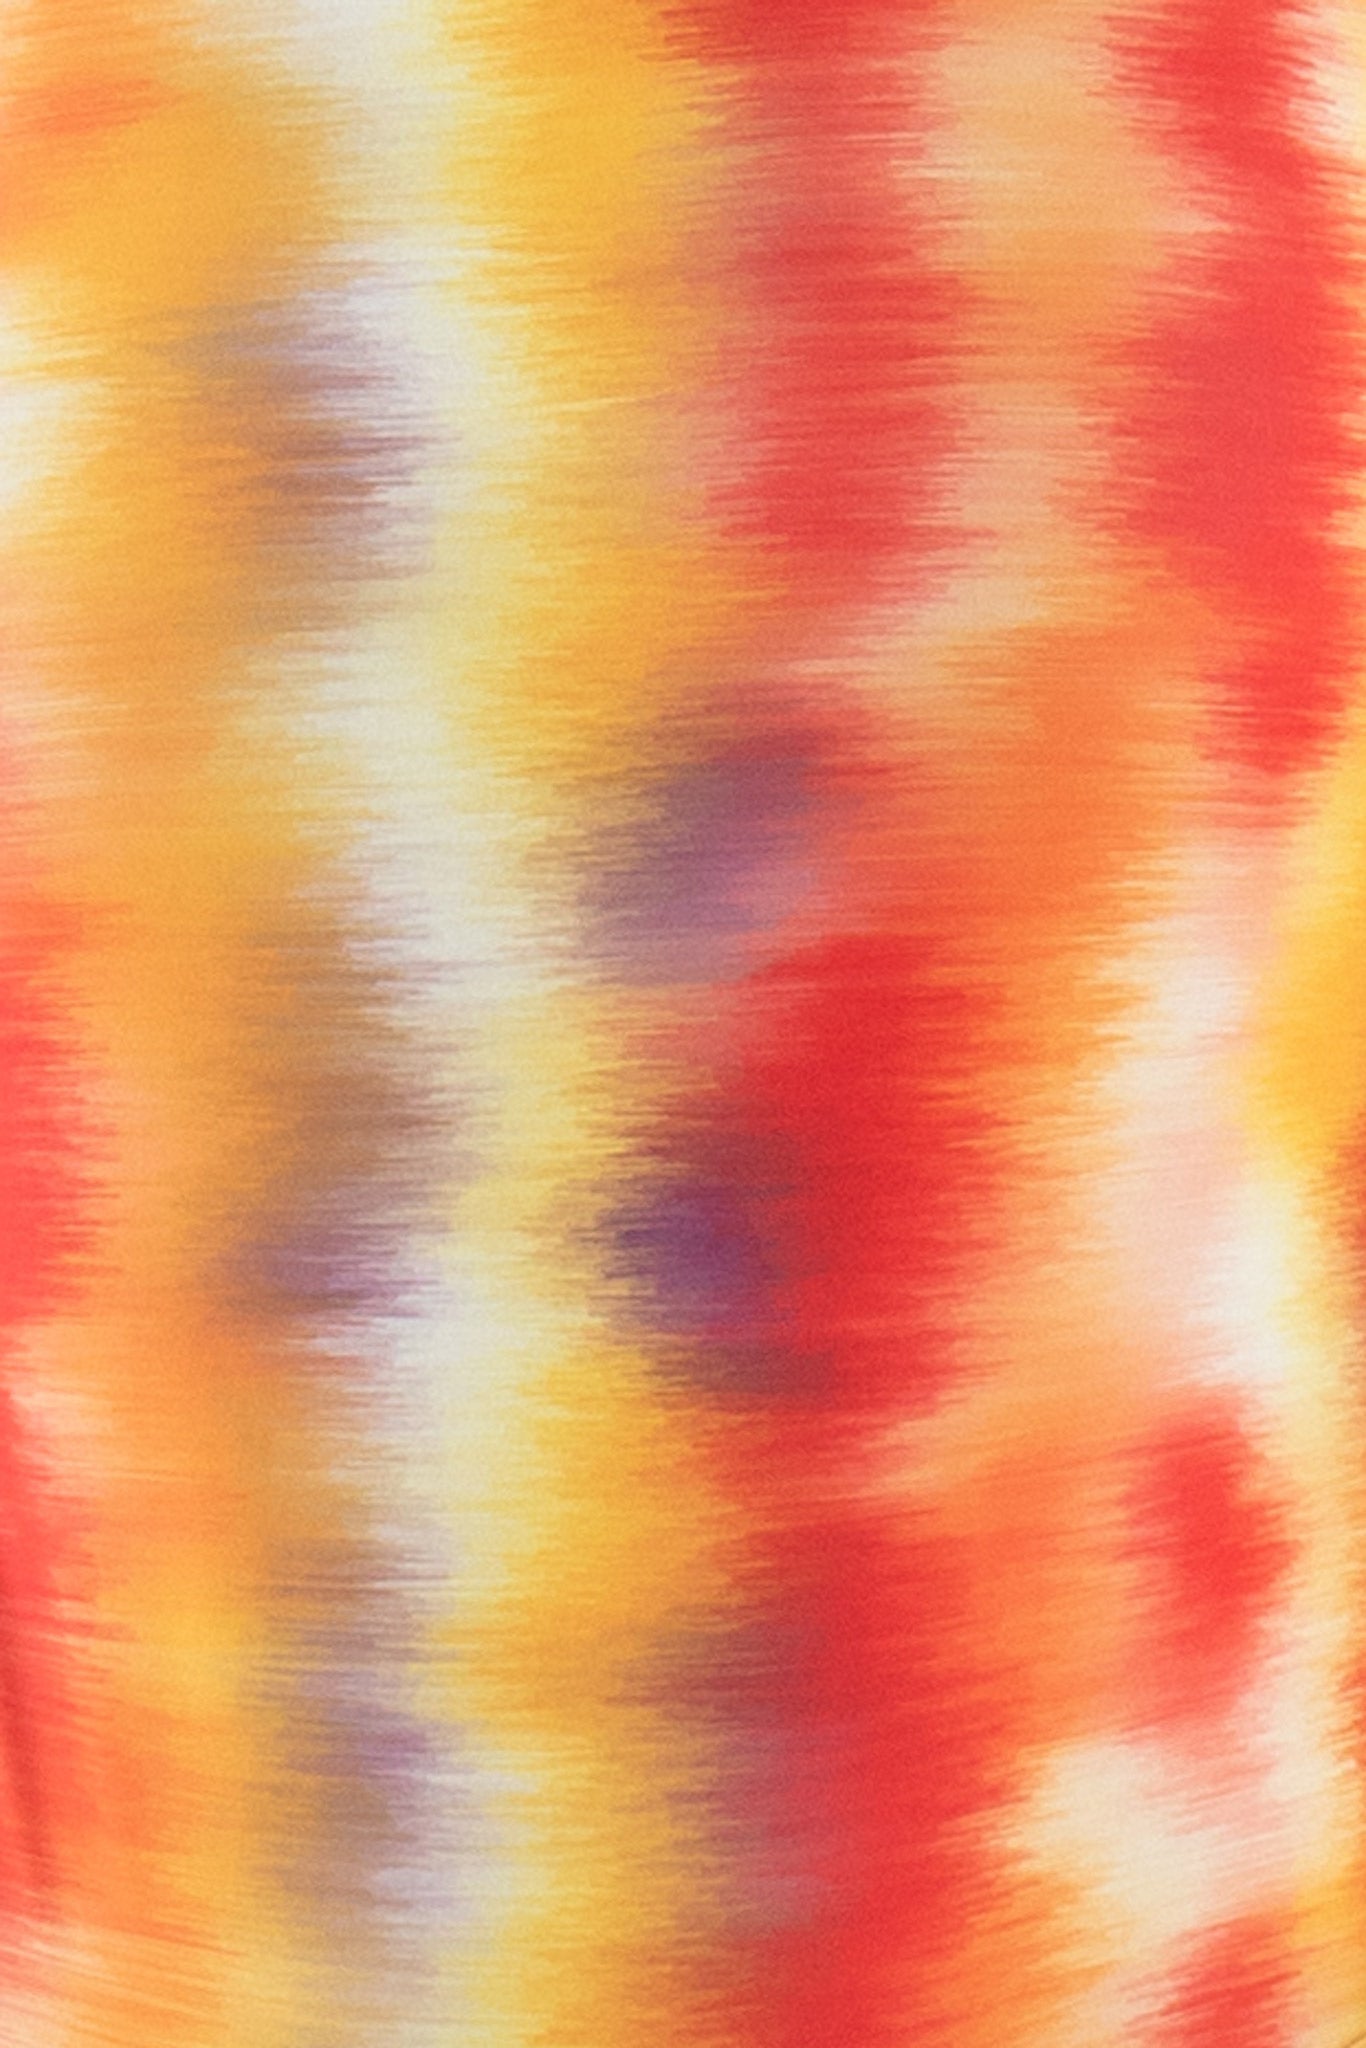 Close-up detail of the tie dye print on the Wayan Sleeveless One-Piece Surf Spring Suit in red, yellow, and orange hues